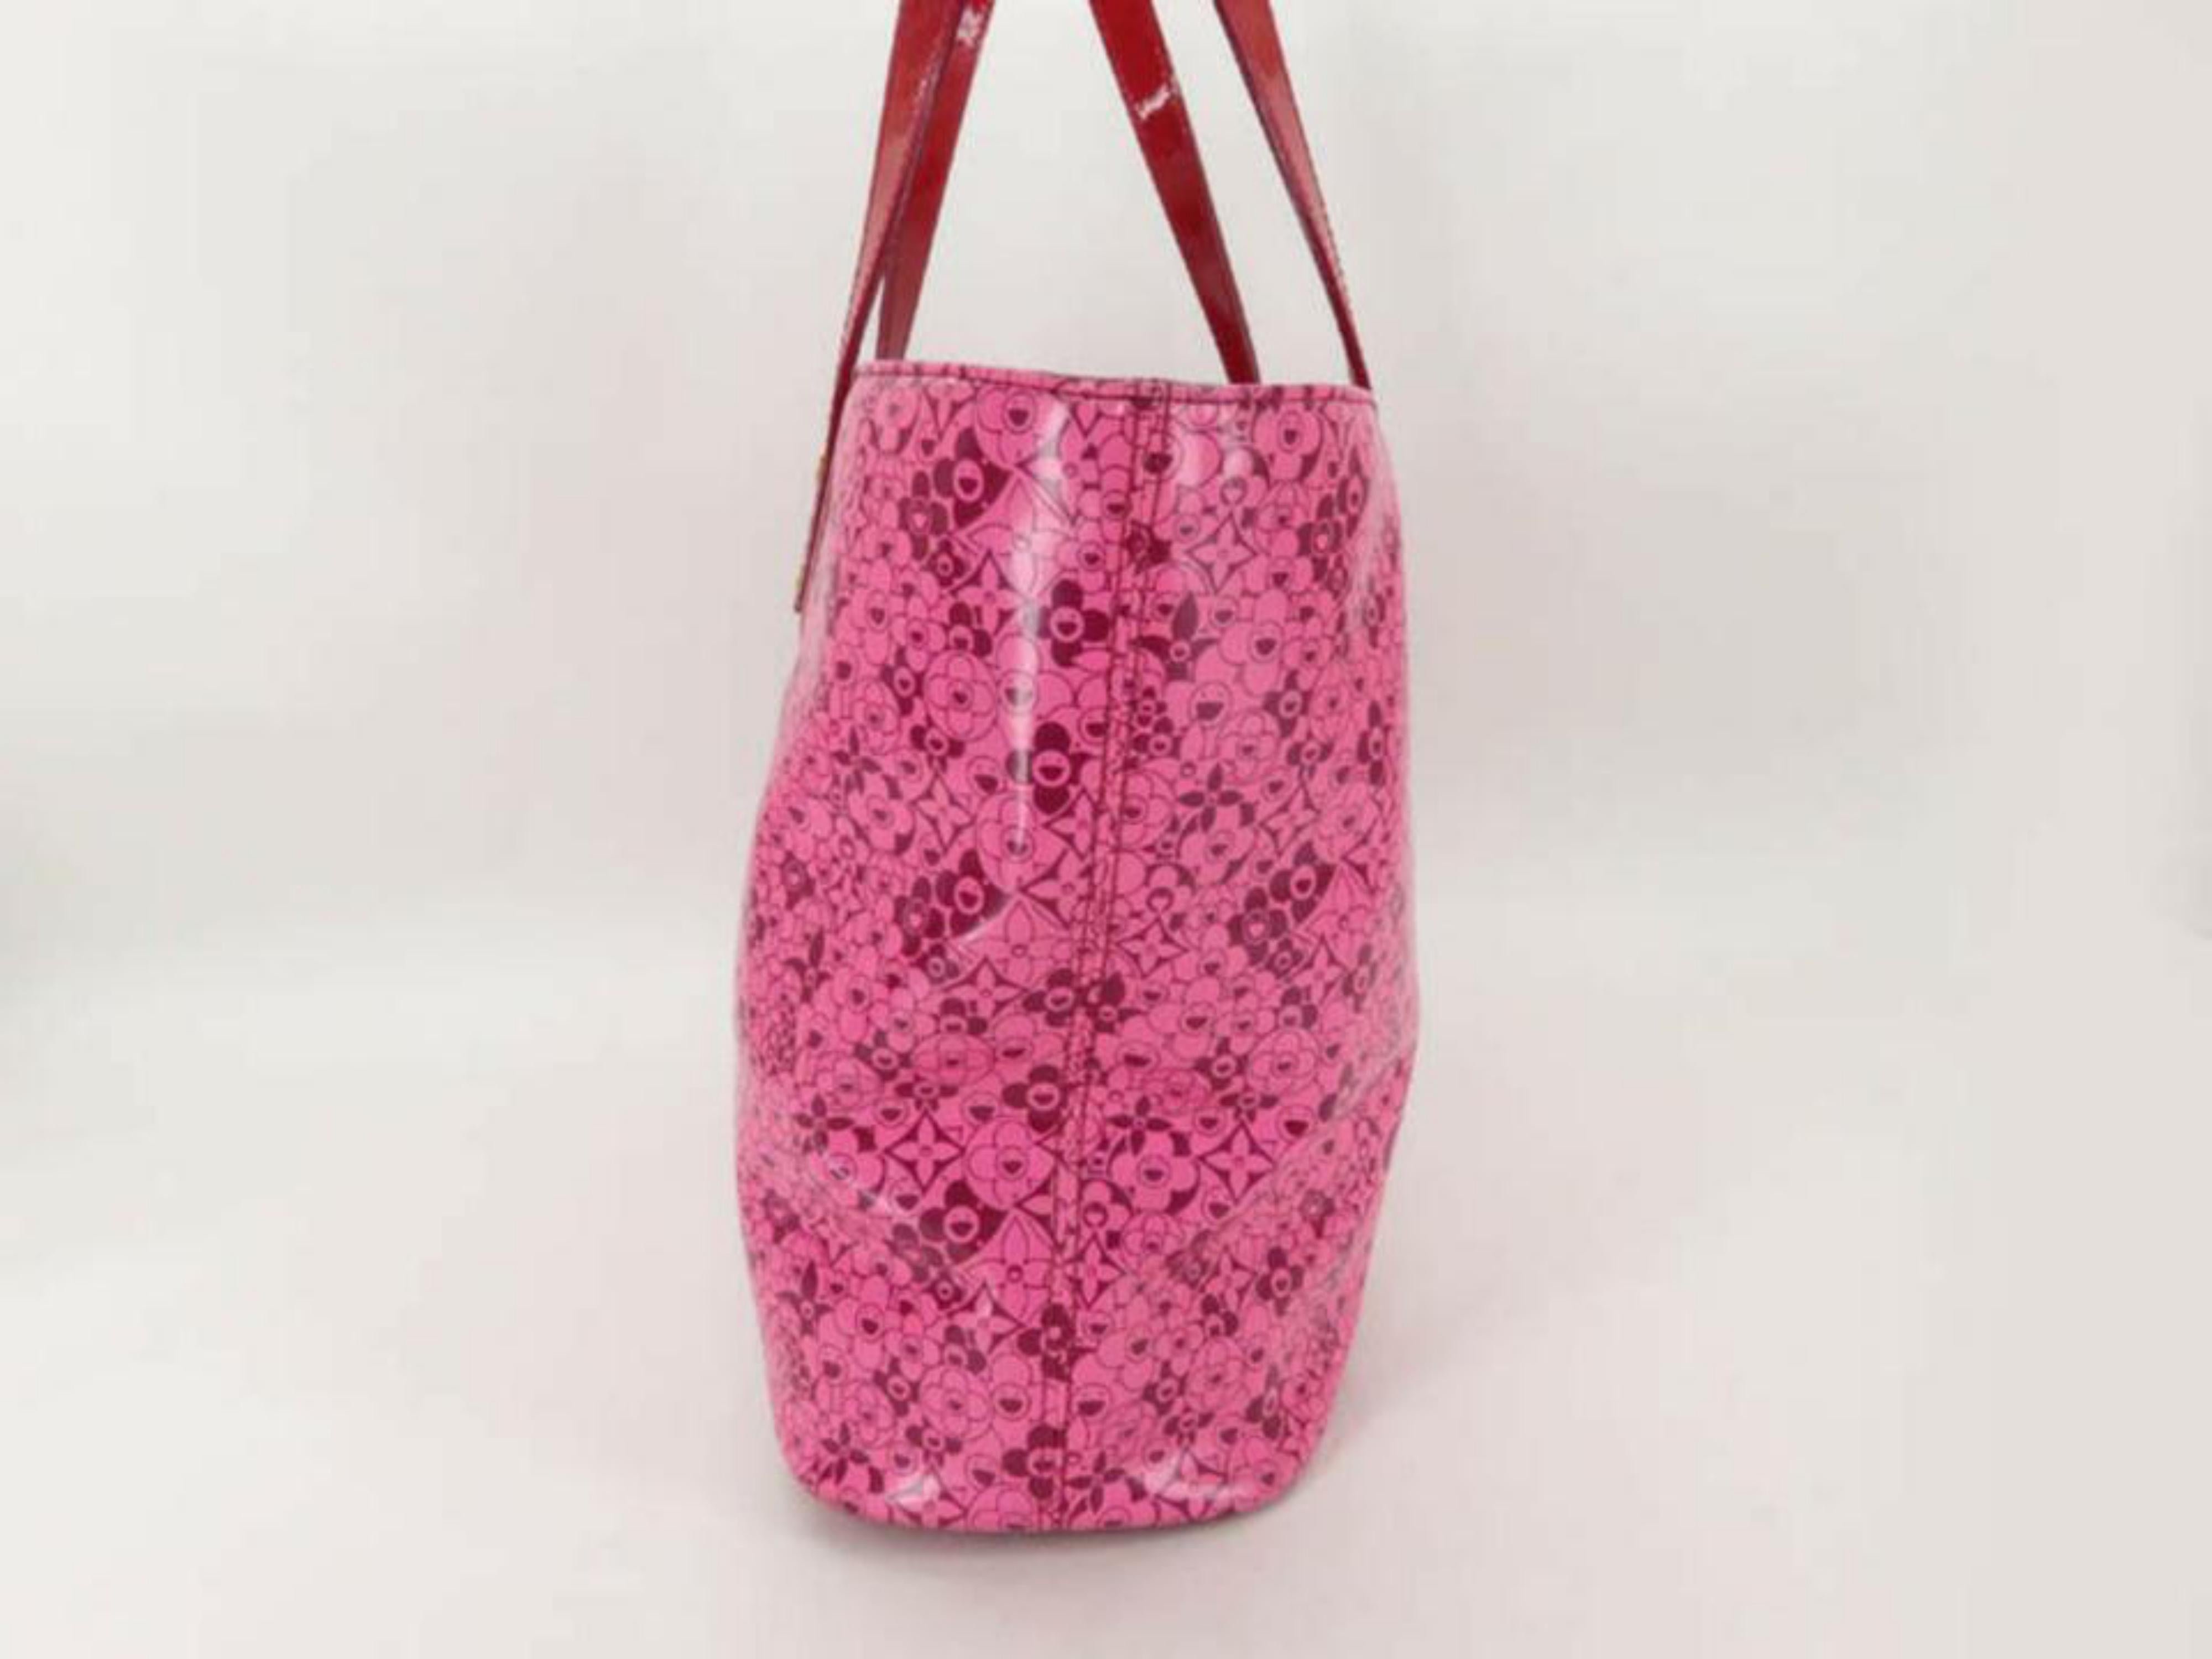 Louis Vuitton Murakami Cosmic Blossom Pm 870012 Pink Leather Tote For Sale 4